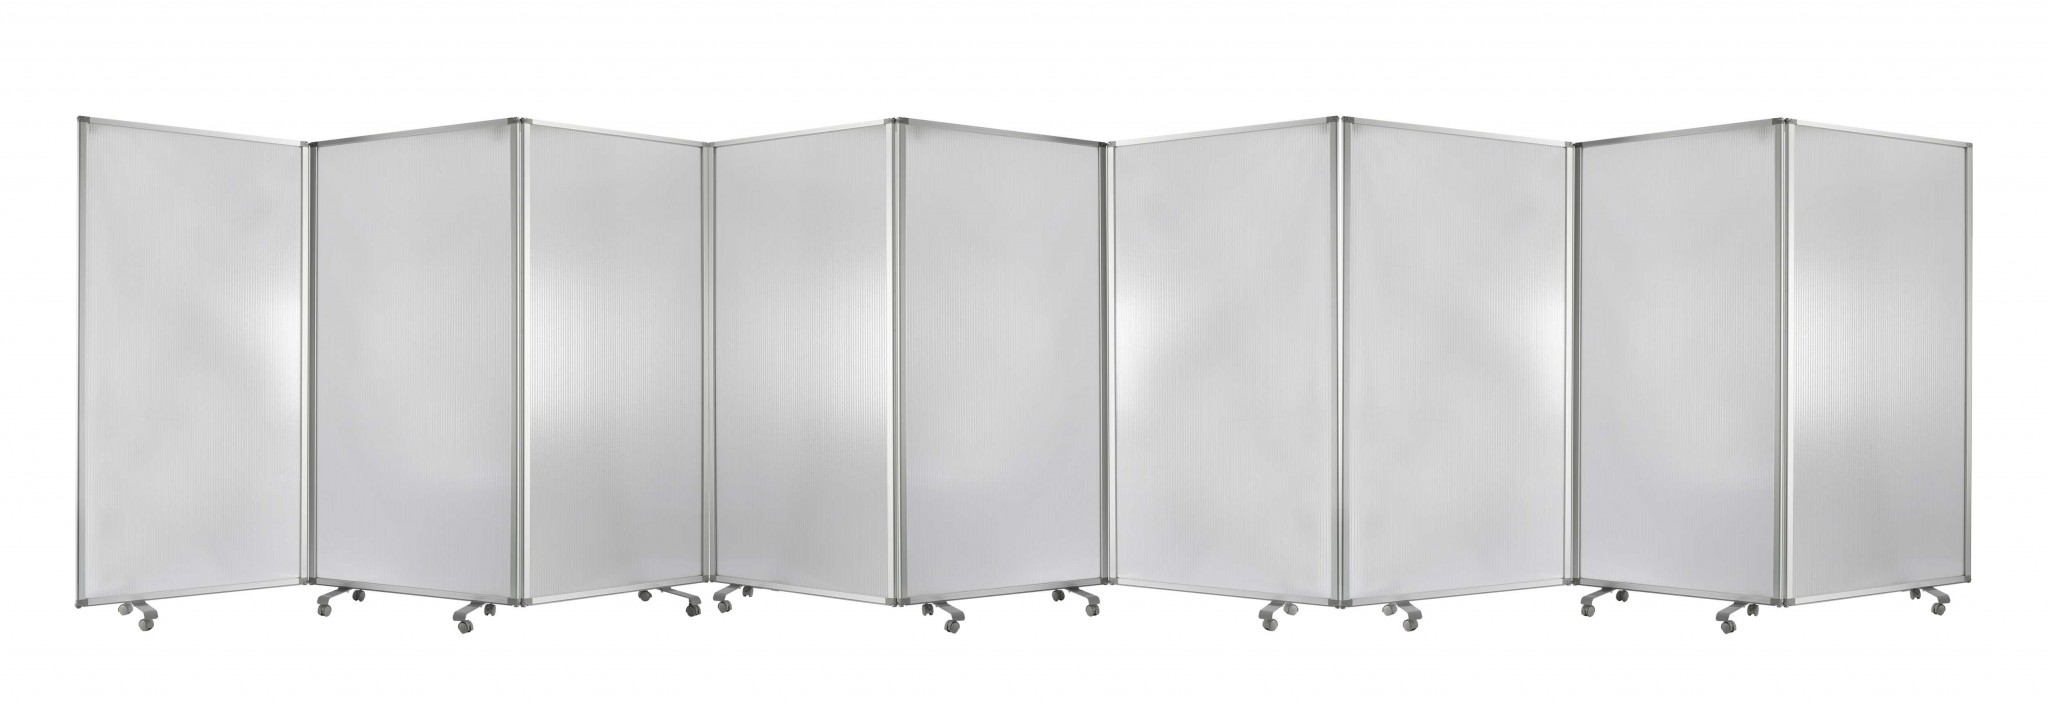 318" x 1" x 71" Clear, Metal, 9 Panel, Resilient Screen